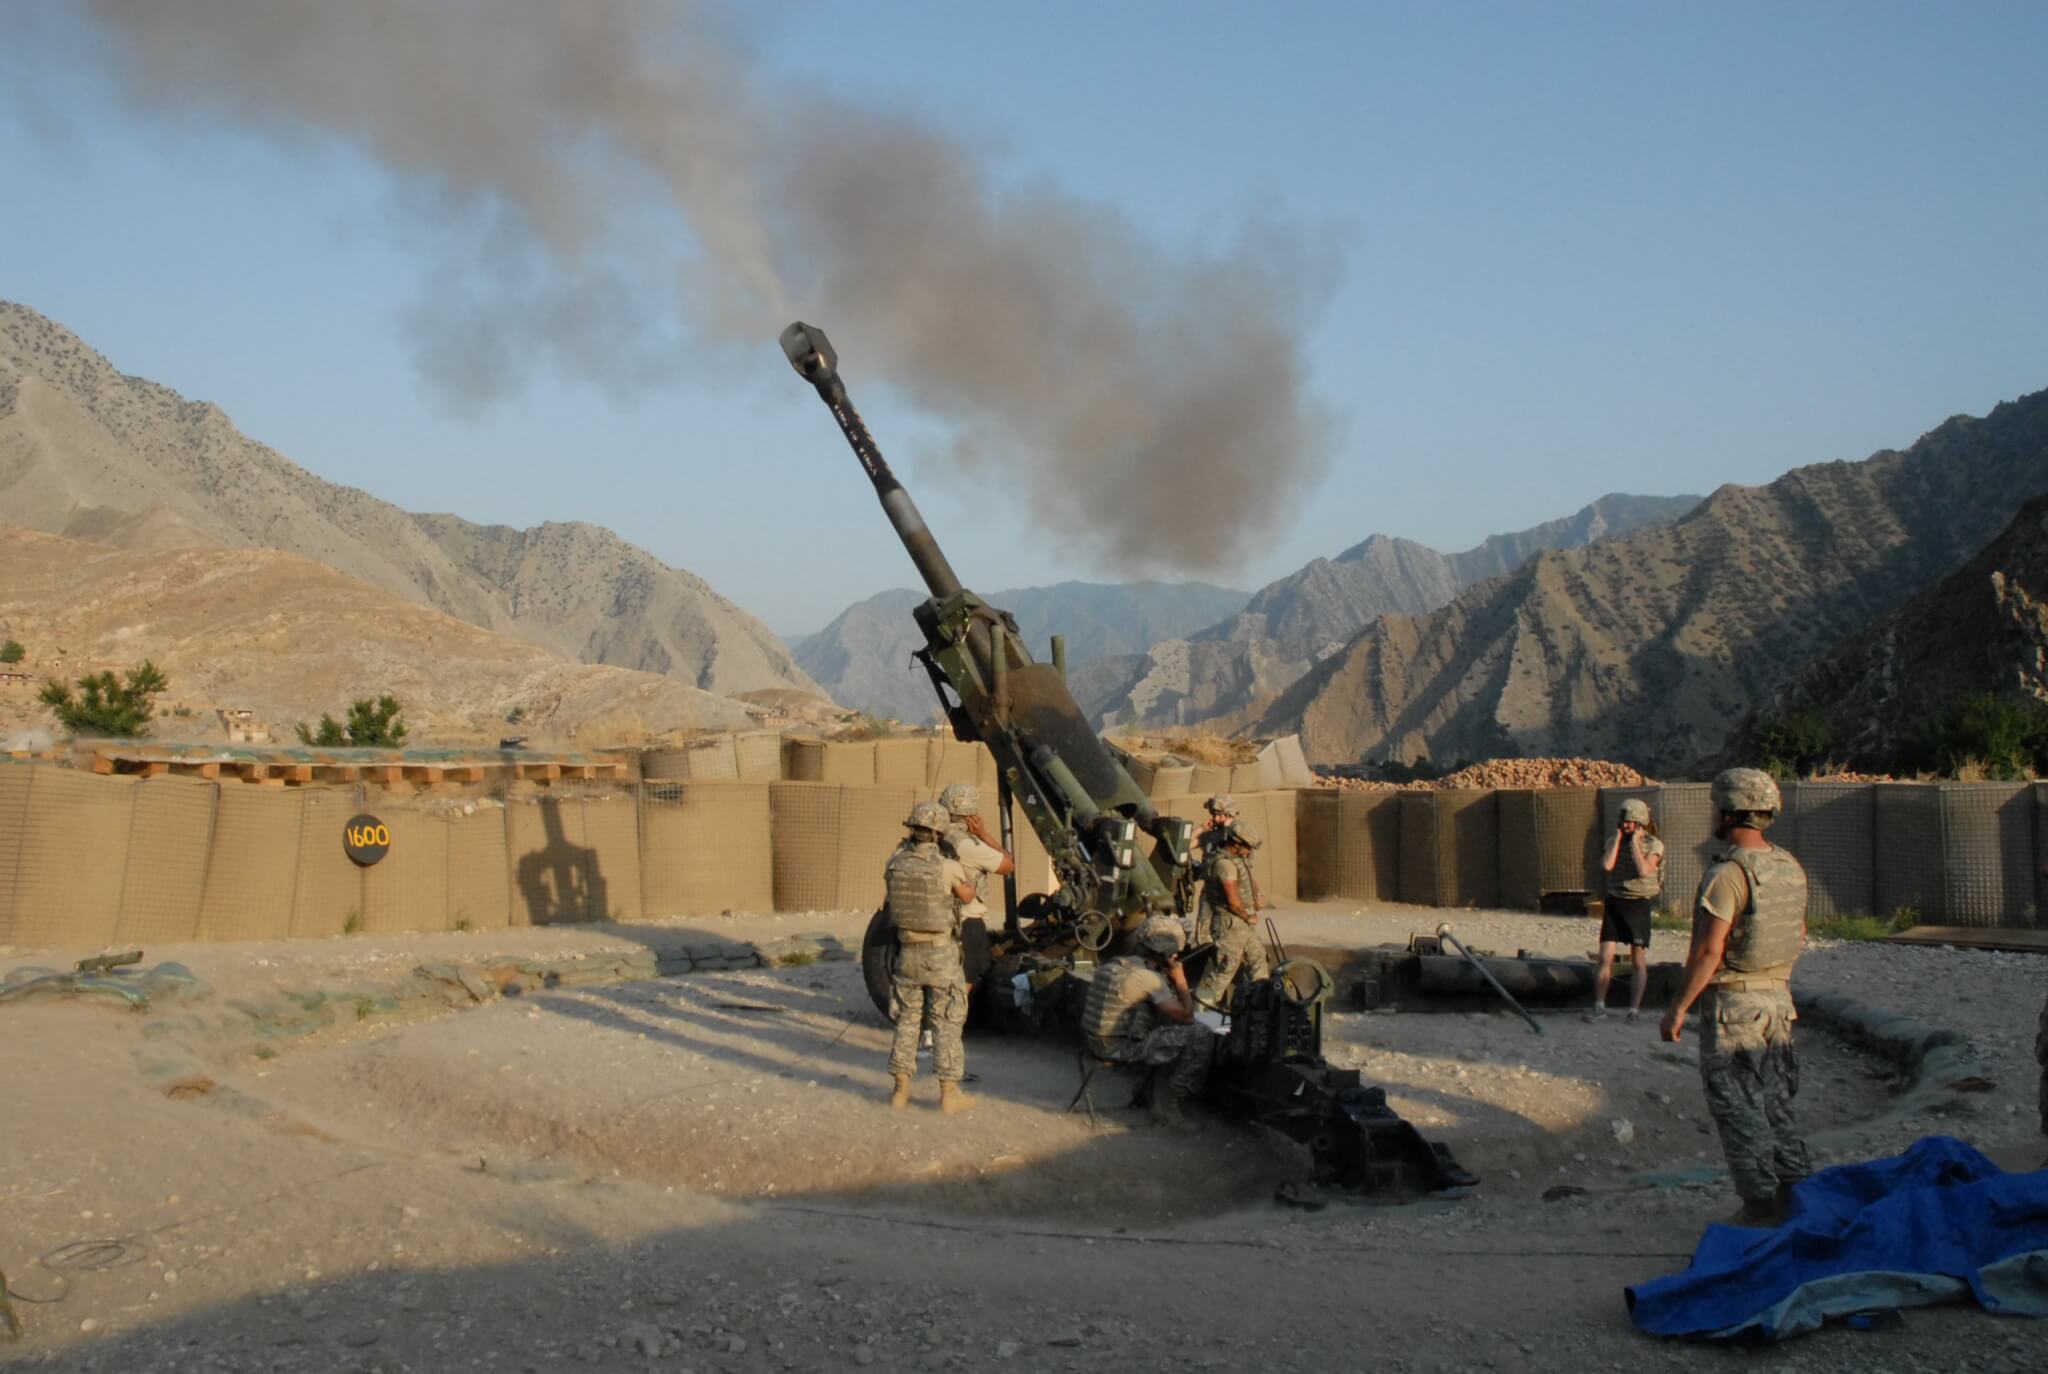  A crew from Battery B, 4th Battalion, 319th Airborne Field Artillery Regiment, fire a 155 mm howitzer in support of infantry operations in a nearby valley at Forward Operating Base Blessing in eastern Afghanistan during the war on terrorism.. Photo by Mark St. Clair / ©2007 Stars and Stripes, All Rights Reserved